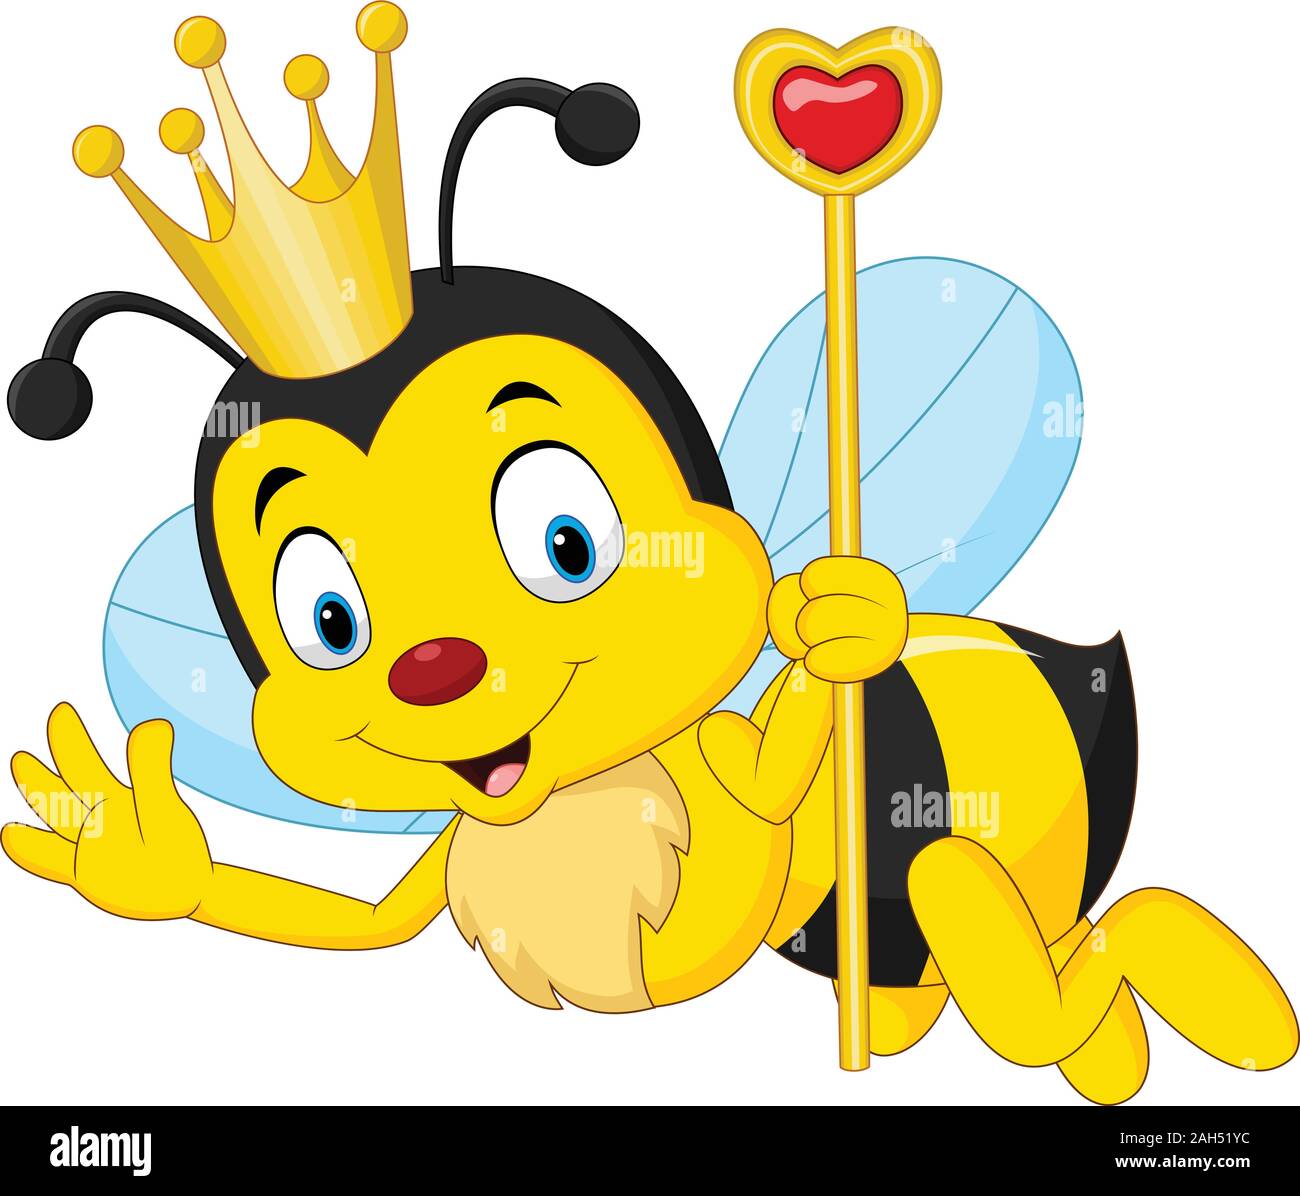 Featured image of post Queen Cartoon Images - Learn how to draw queen cartoon pictures using these outlines or print just for coloring.